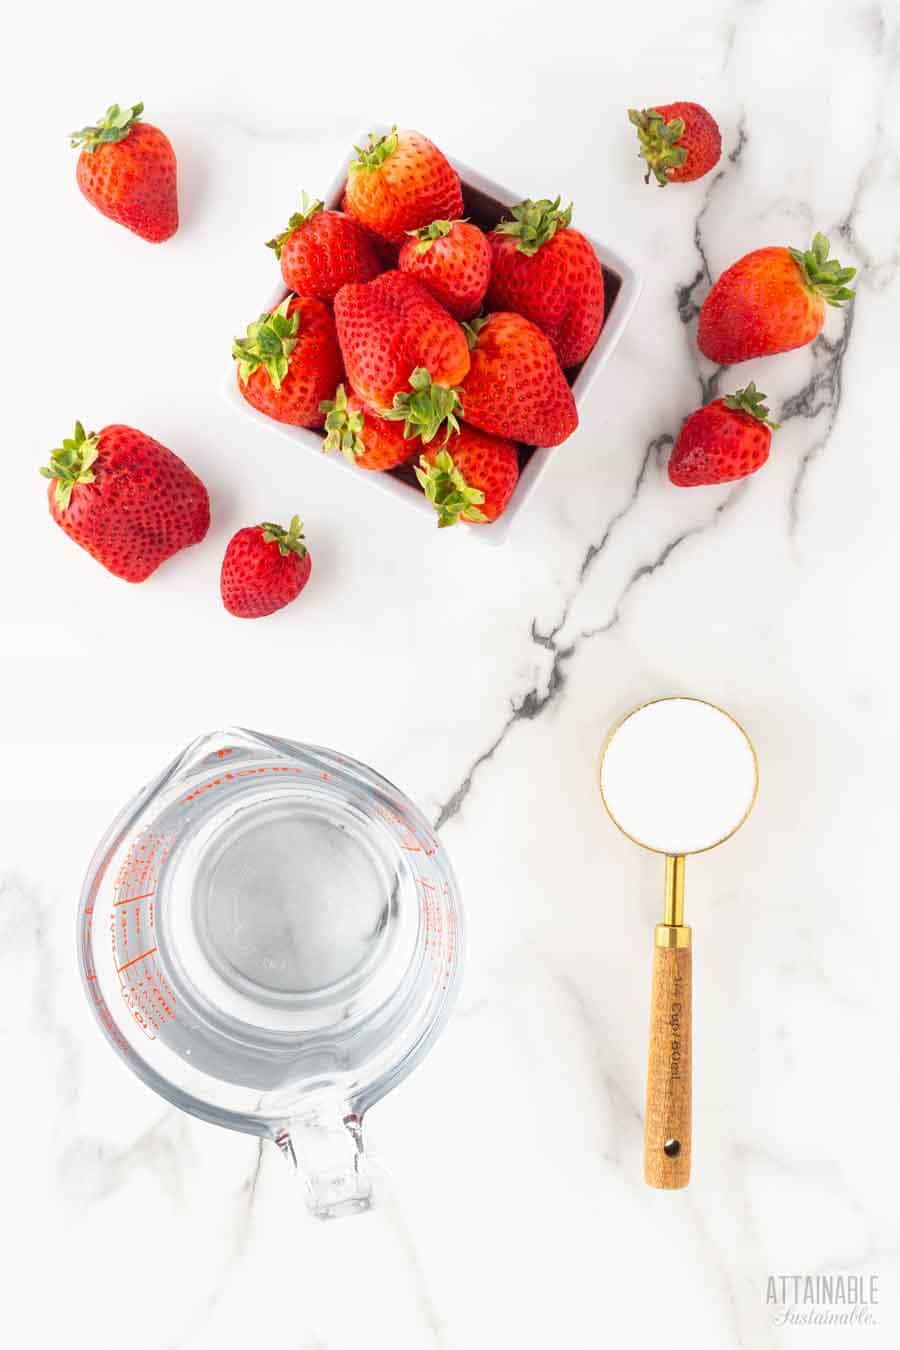 ingredients to make strawberry puree on a marble background: strawberries, sugar, and water.